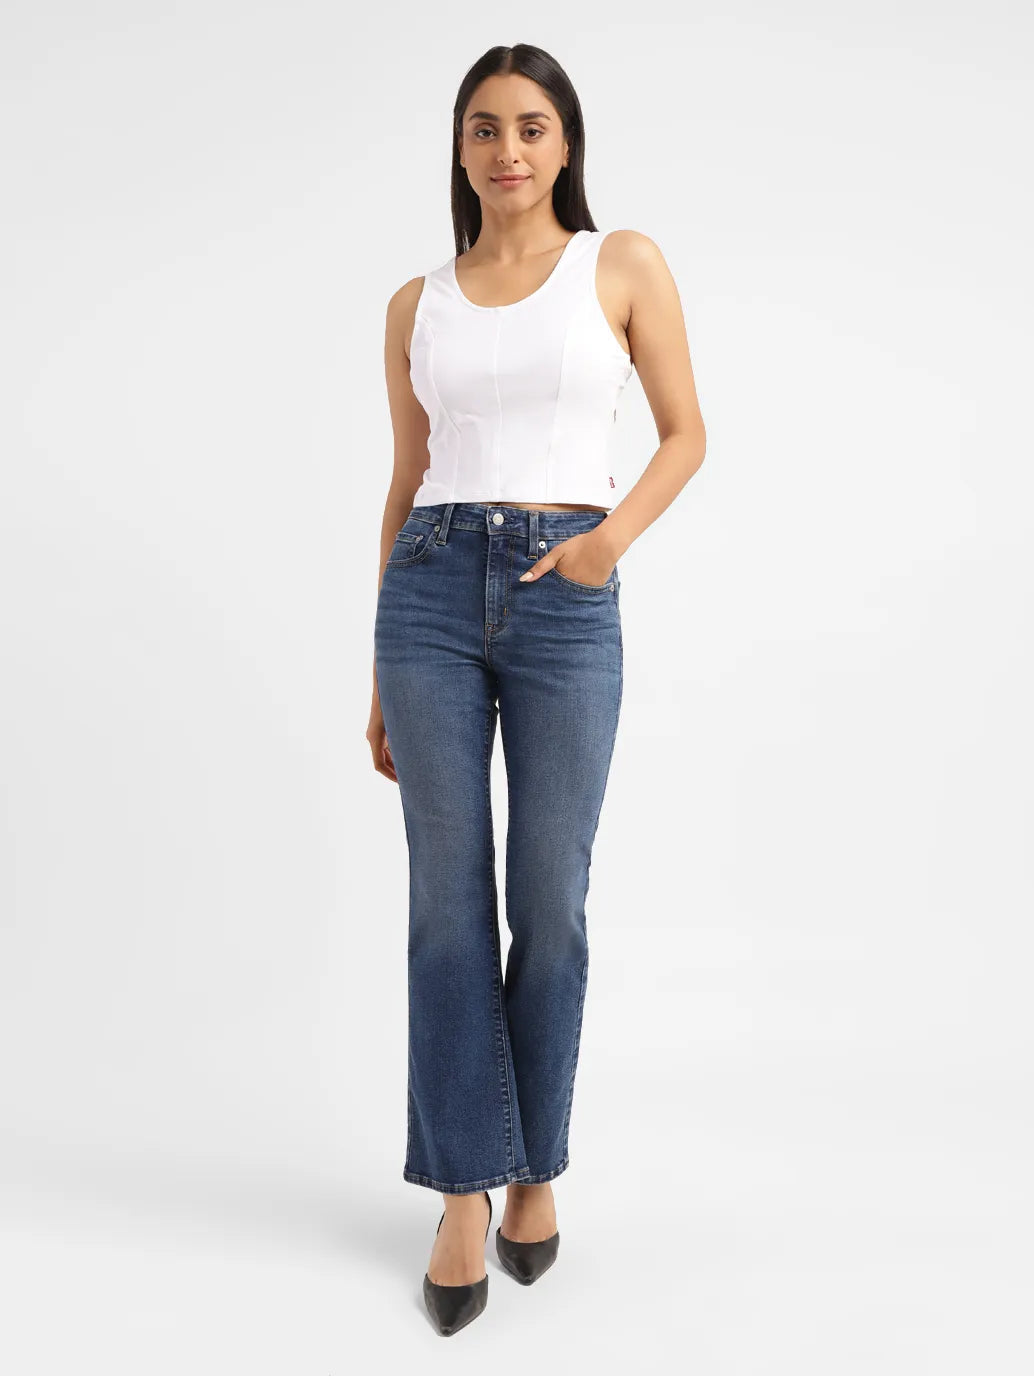 Women's Mid Rise 725 Bootcut Jeans